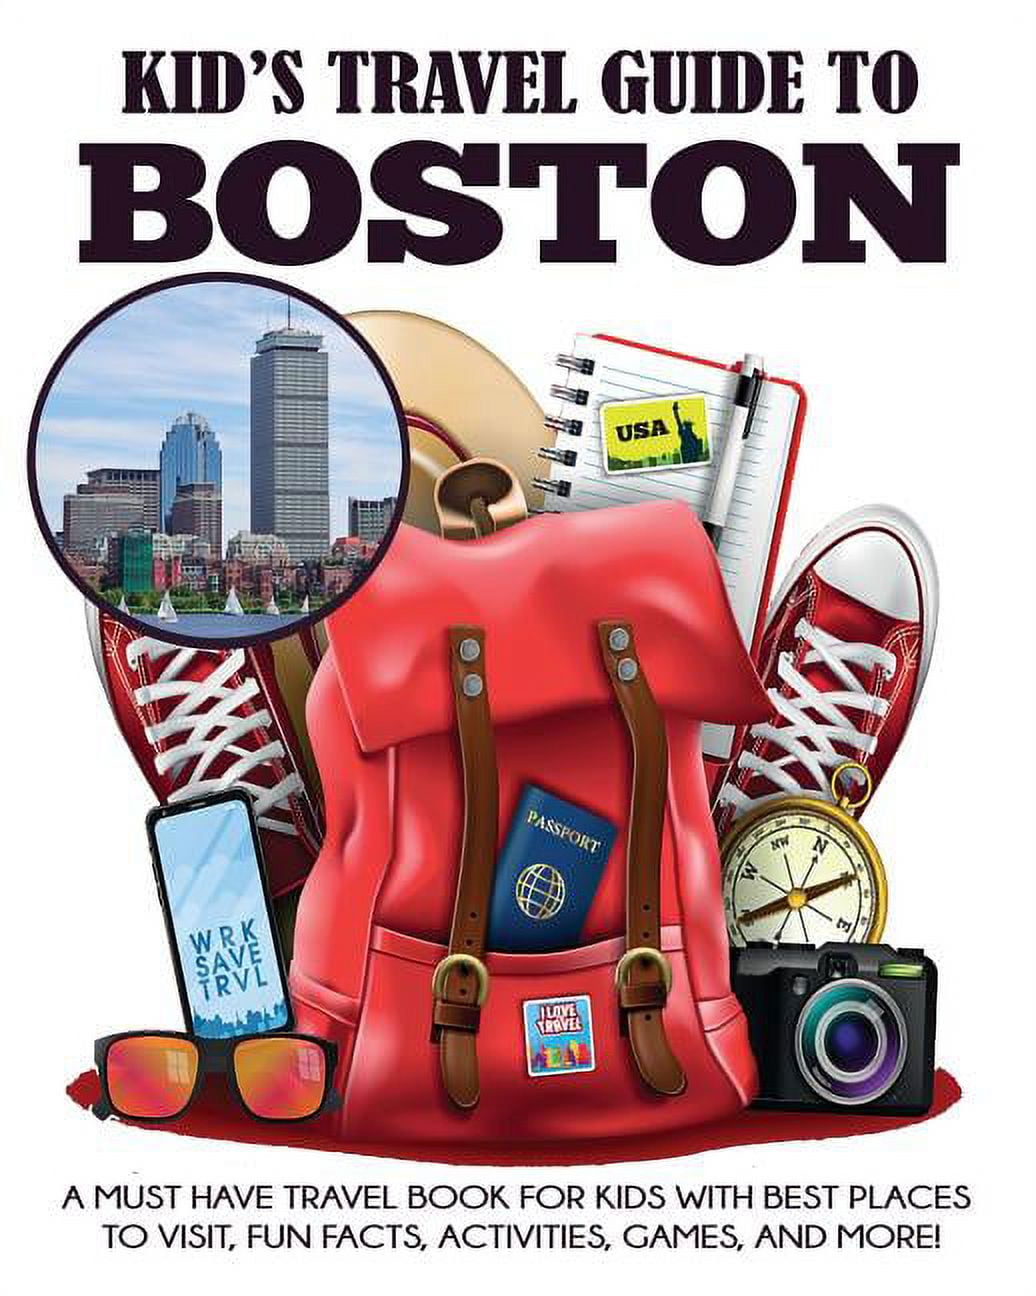 Kid's Travel Guide to Boston: A Must Have Travel Book for Kids with Best Places to Visit, Fun Facts, Activities, Games, and More! [Book]